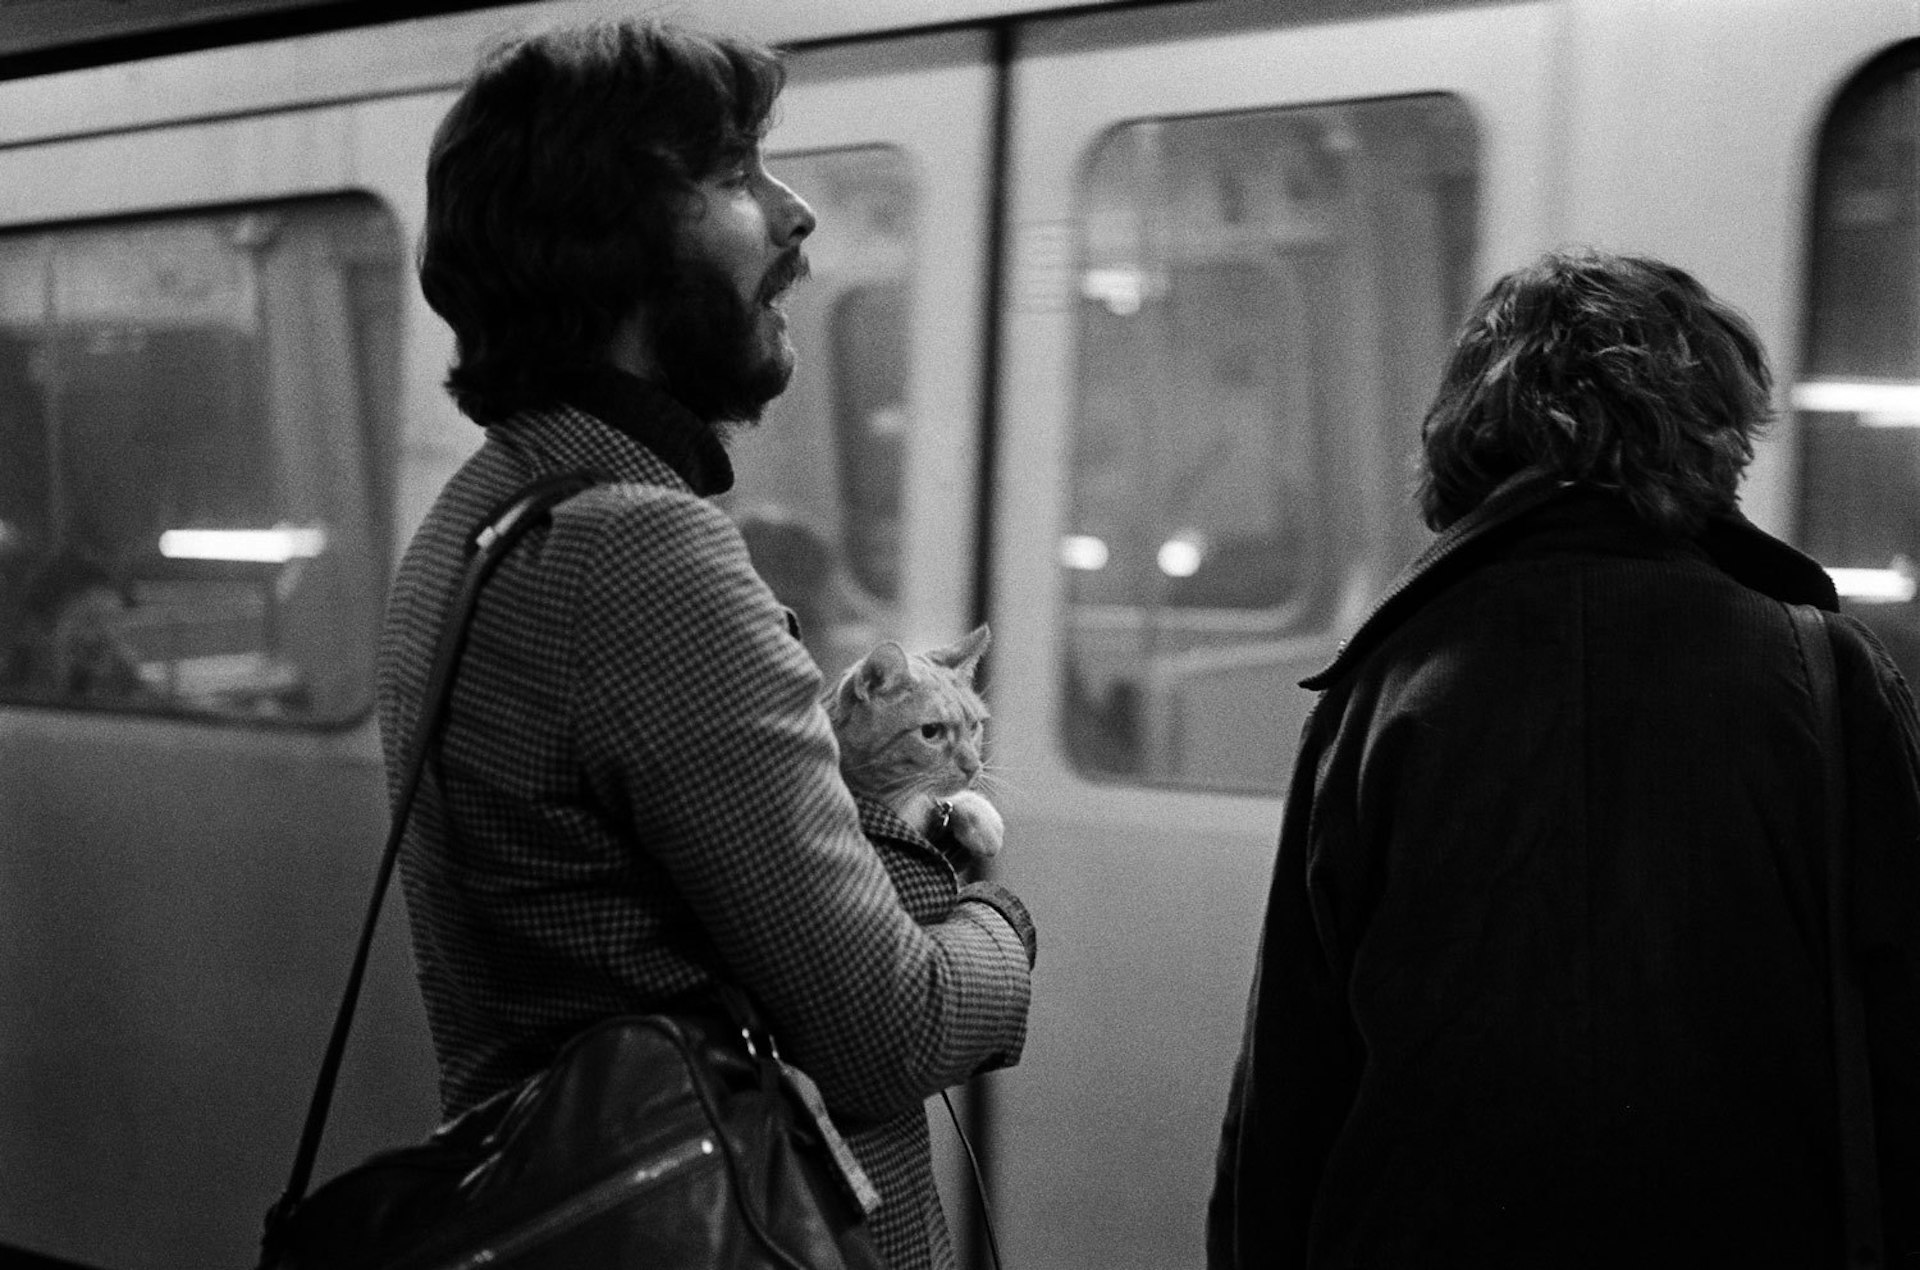 Intimate shots of the London Underground in the ’70s